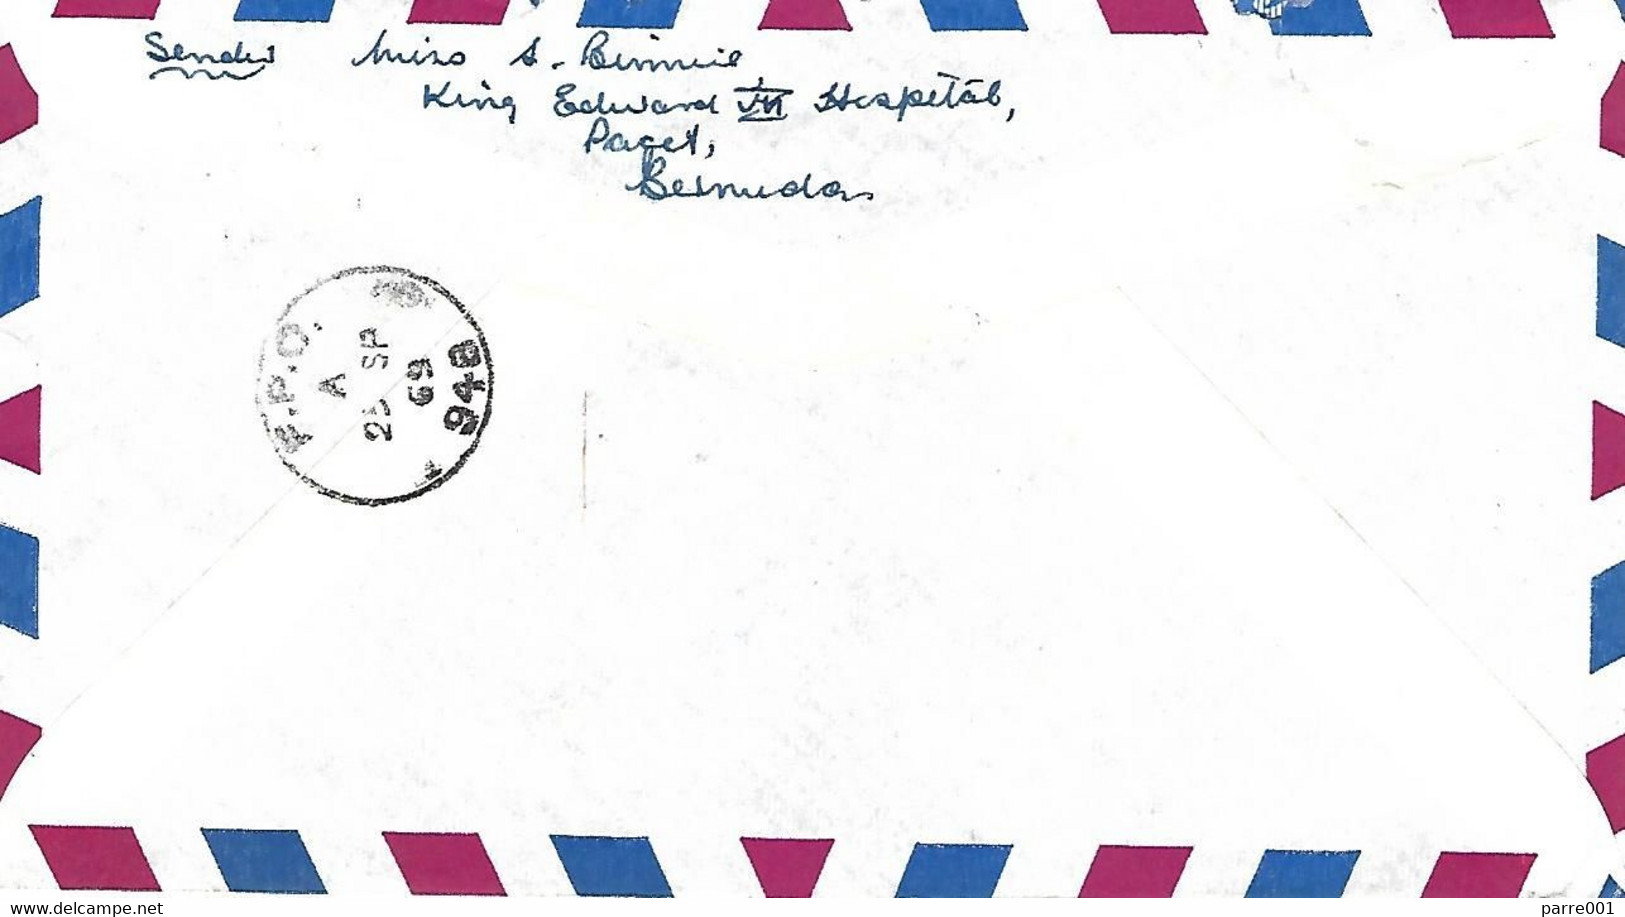 Bermuda 1974 FPO 948 BFPO1 Kowloon 40 Postal Courrier Communications Unit Royal Engineers Forces Official Cover - Covers & Documents